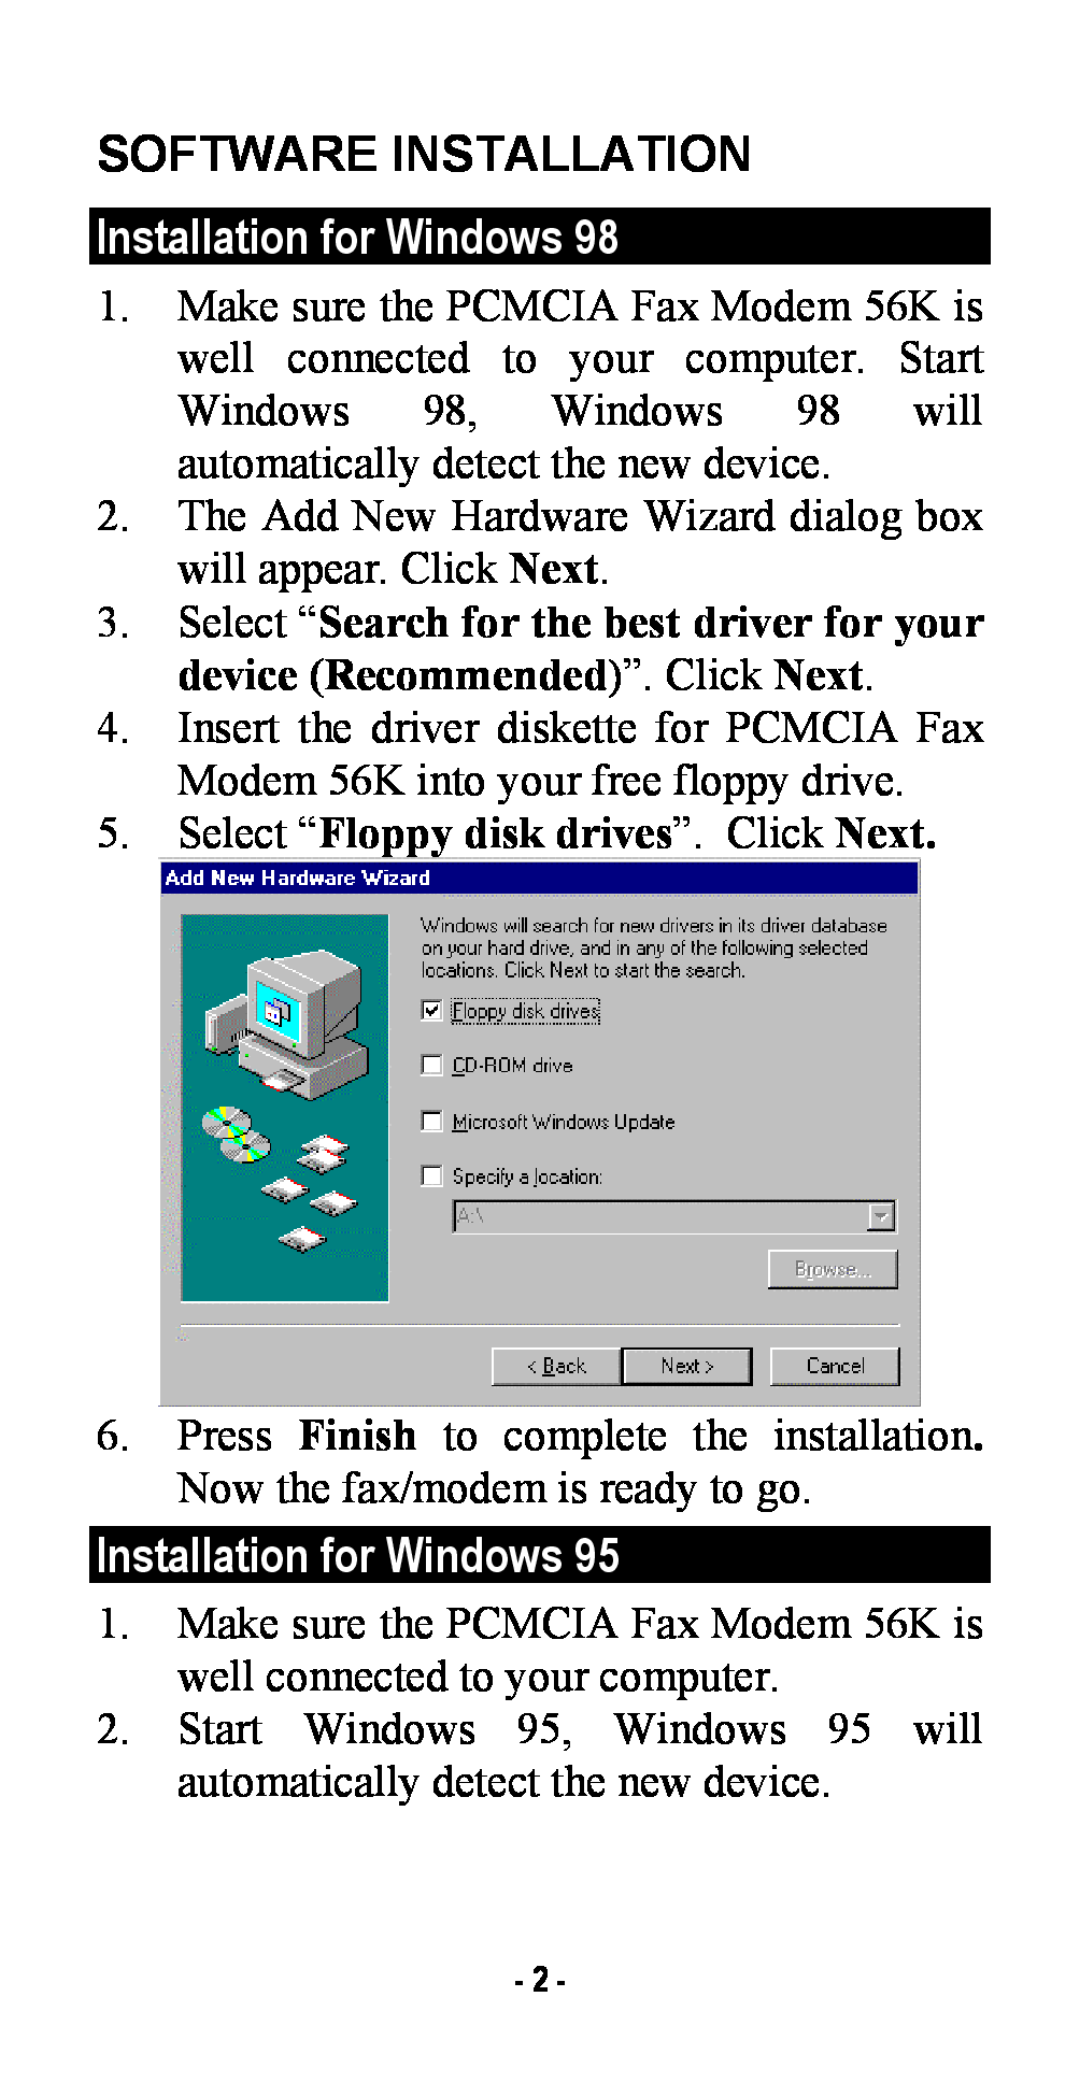 Abocom FM560MX manual Software Installation, Installation for Windows, Select “Floppy disk drives”. Click Next 